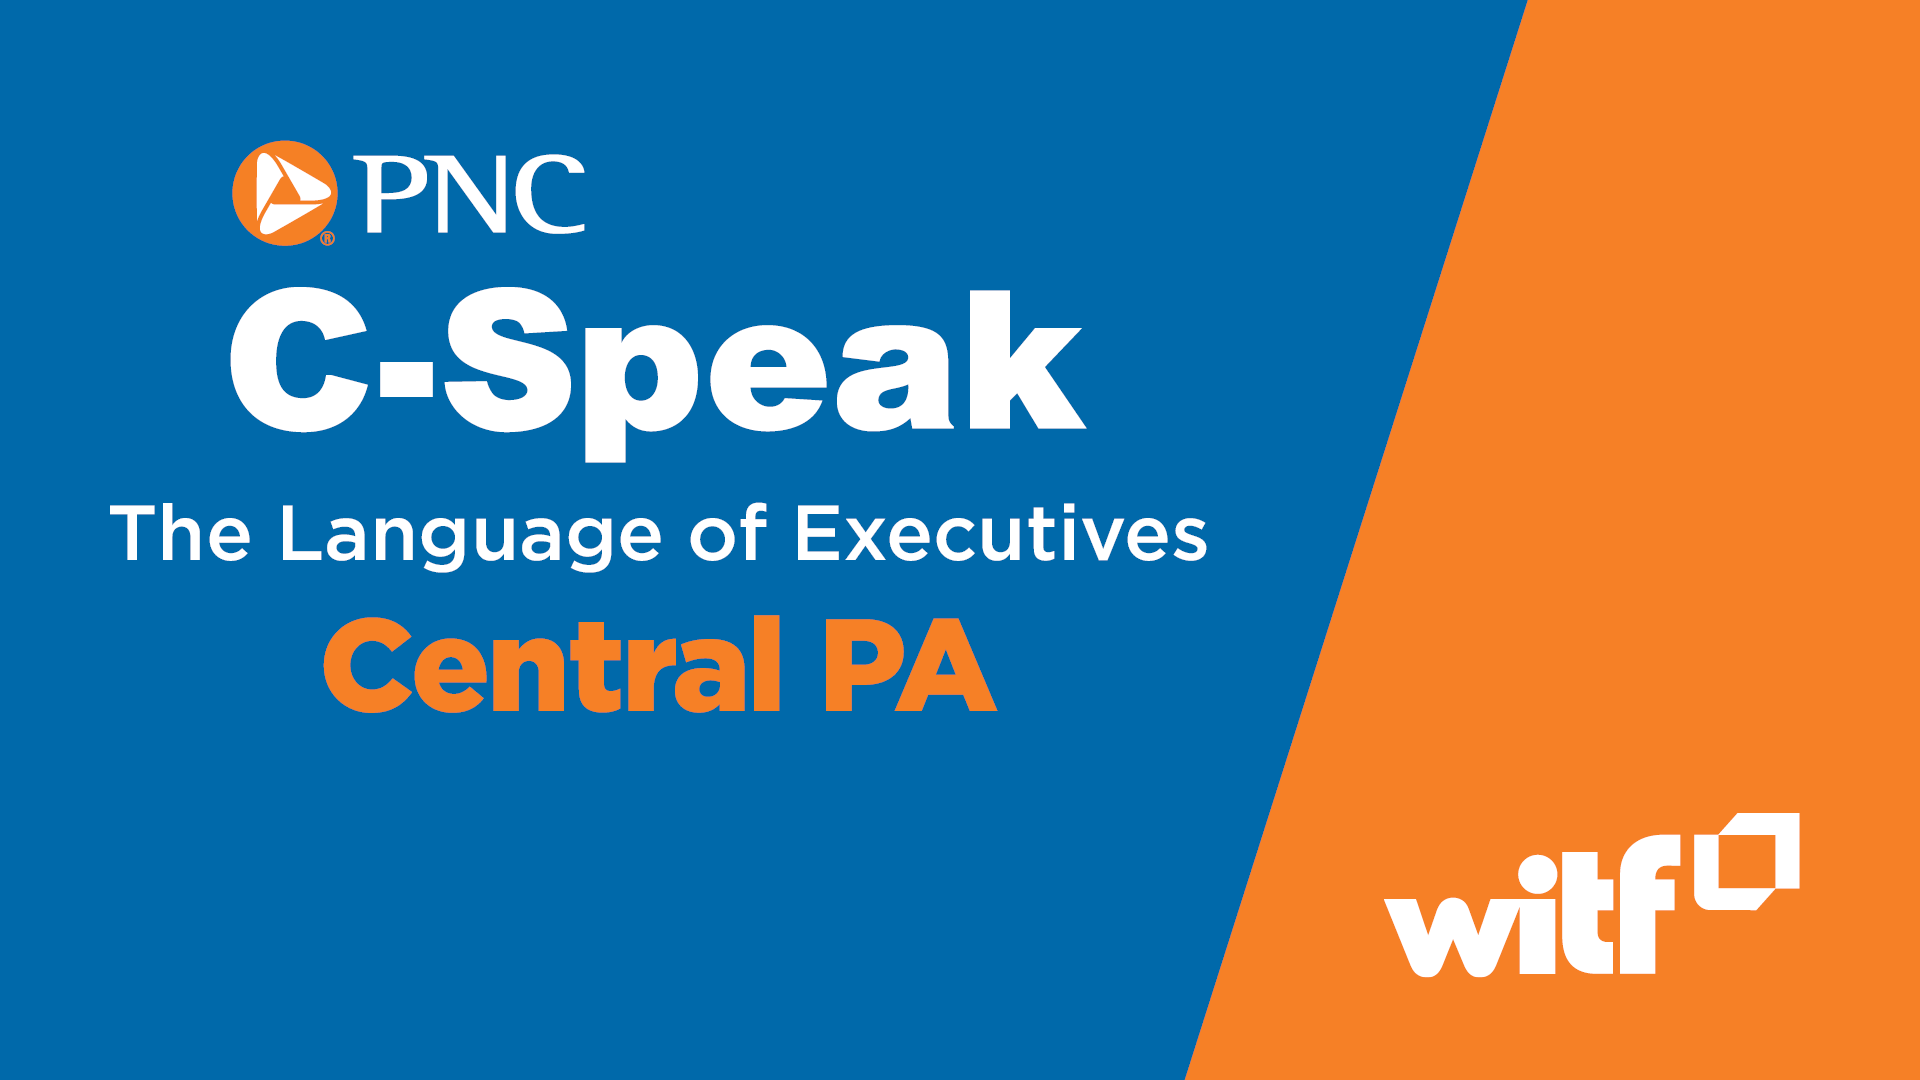 PNC C-Speak | Hosted by Nell McCormack Abom and Jim Hoehn